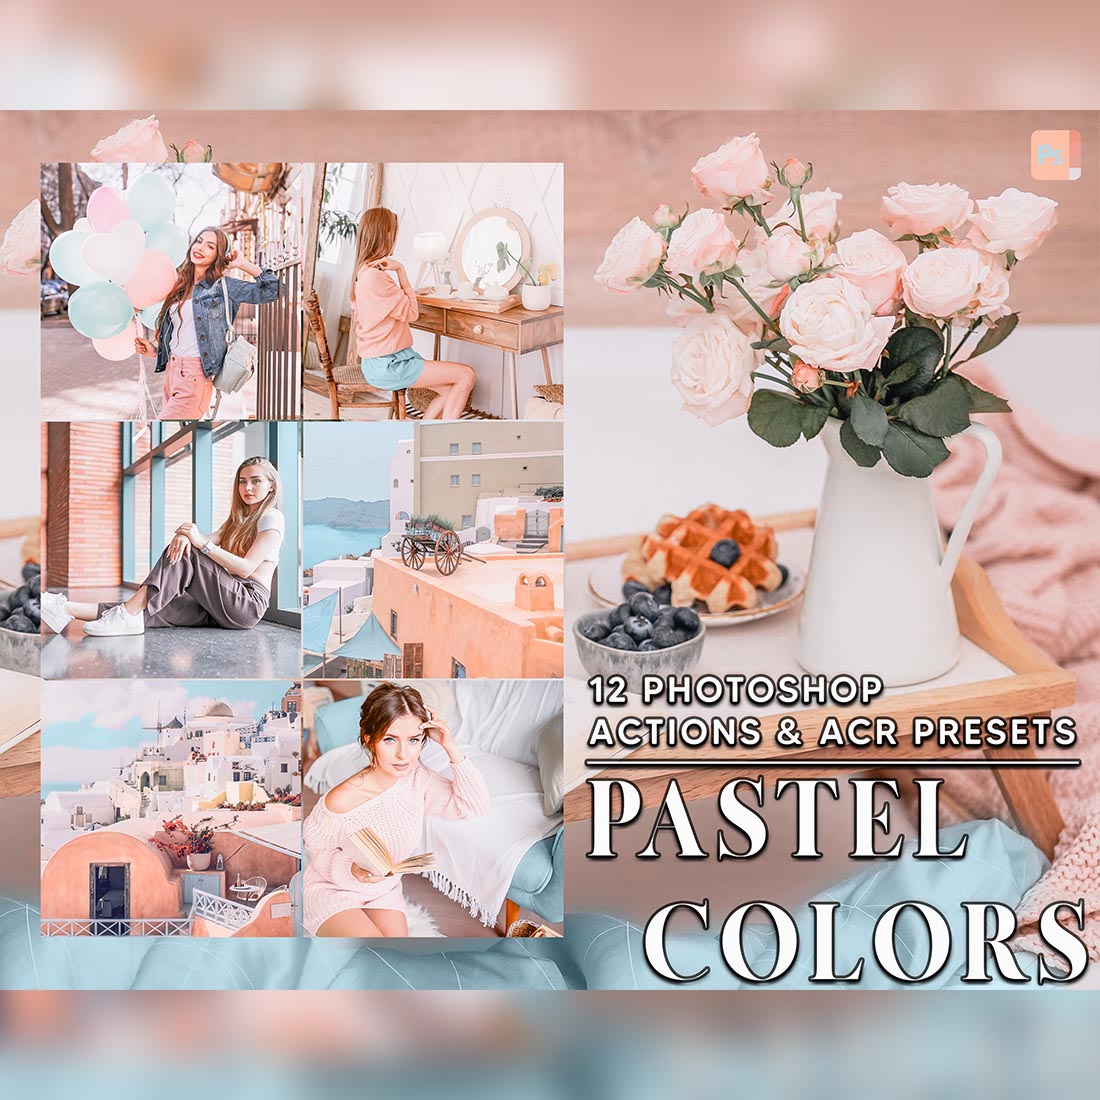 12 Photoshop Actions, Pastel Colors Ps Action, Bright ACR Preset, Spring Girl Ps Filter, Atn Portrait And Lifestyle Theme For Instagram, Blogger cover image.